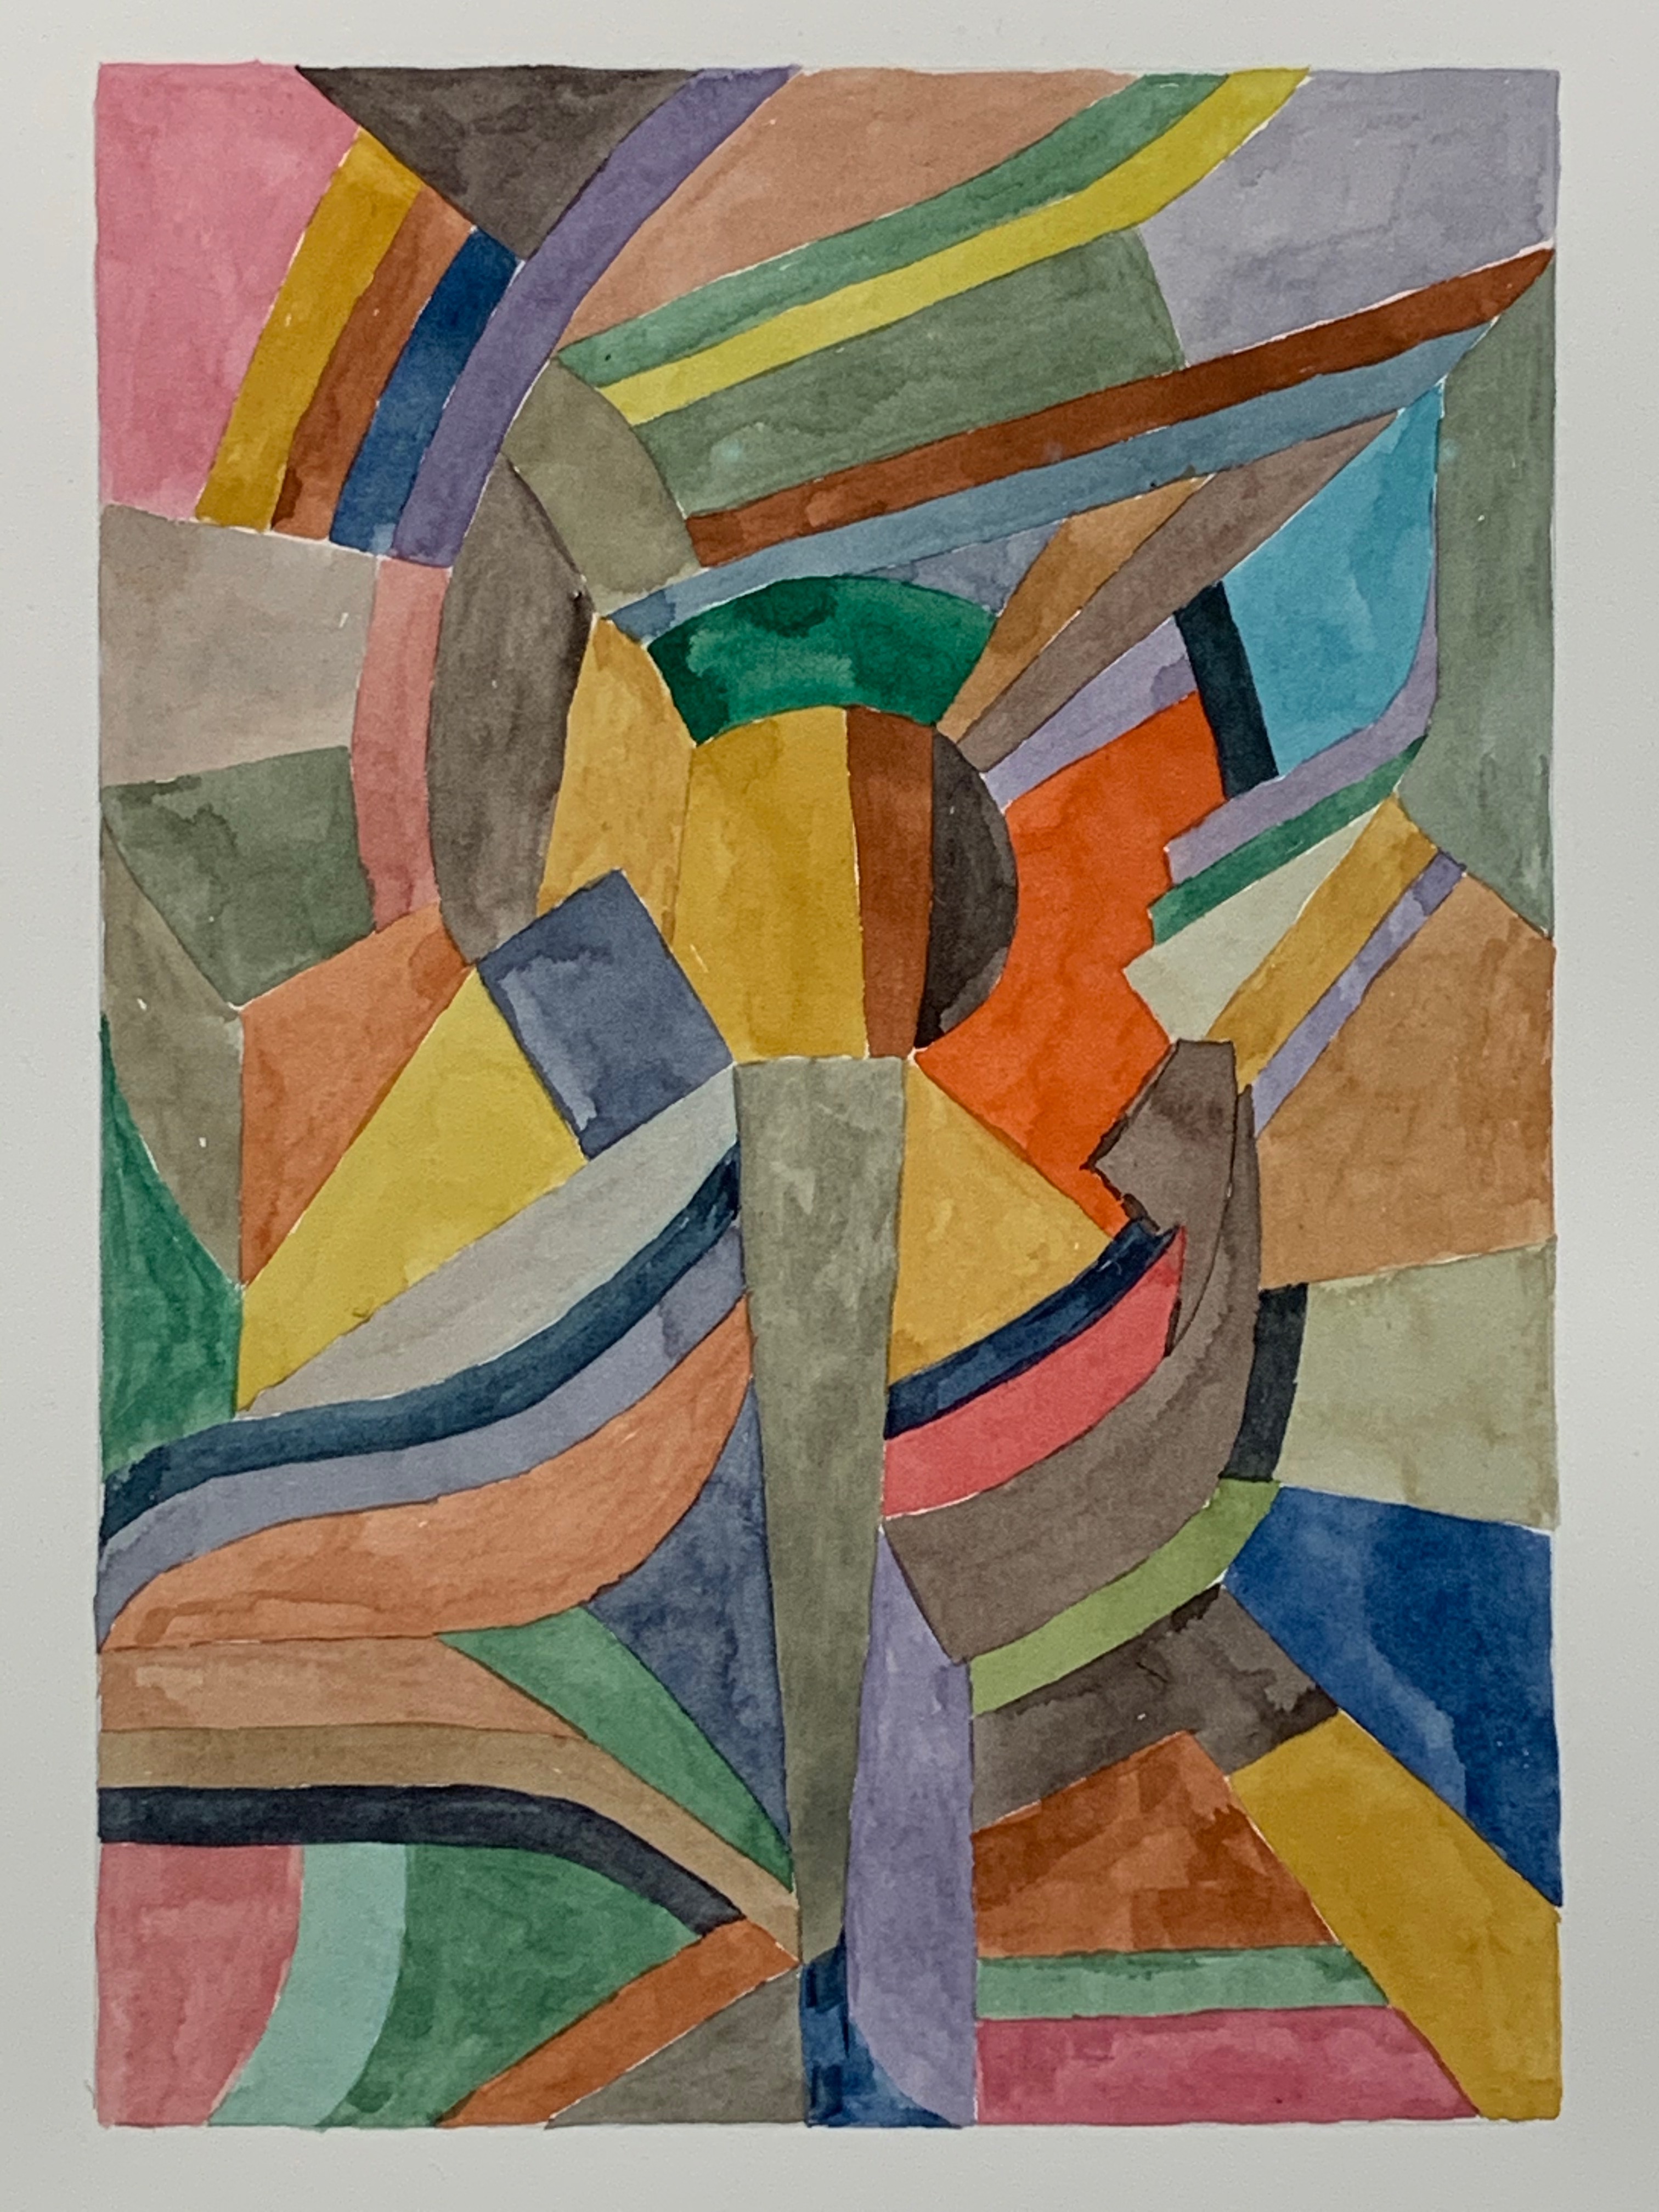 An abstract watercolor by Scott Olson, on view at Abattoir gallery, trembles with vitality.